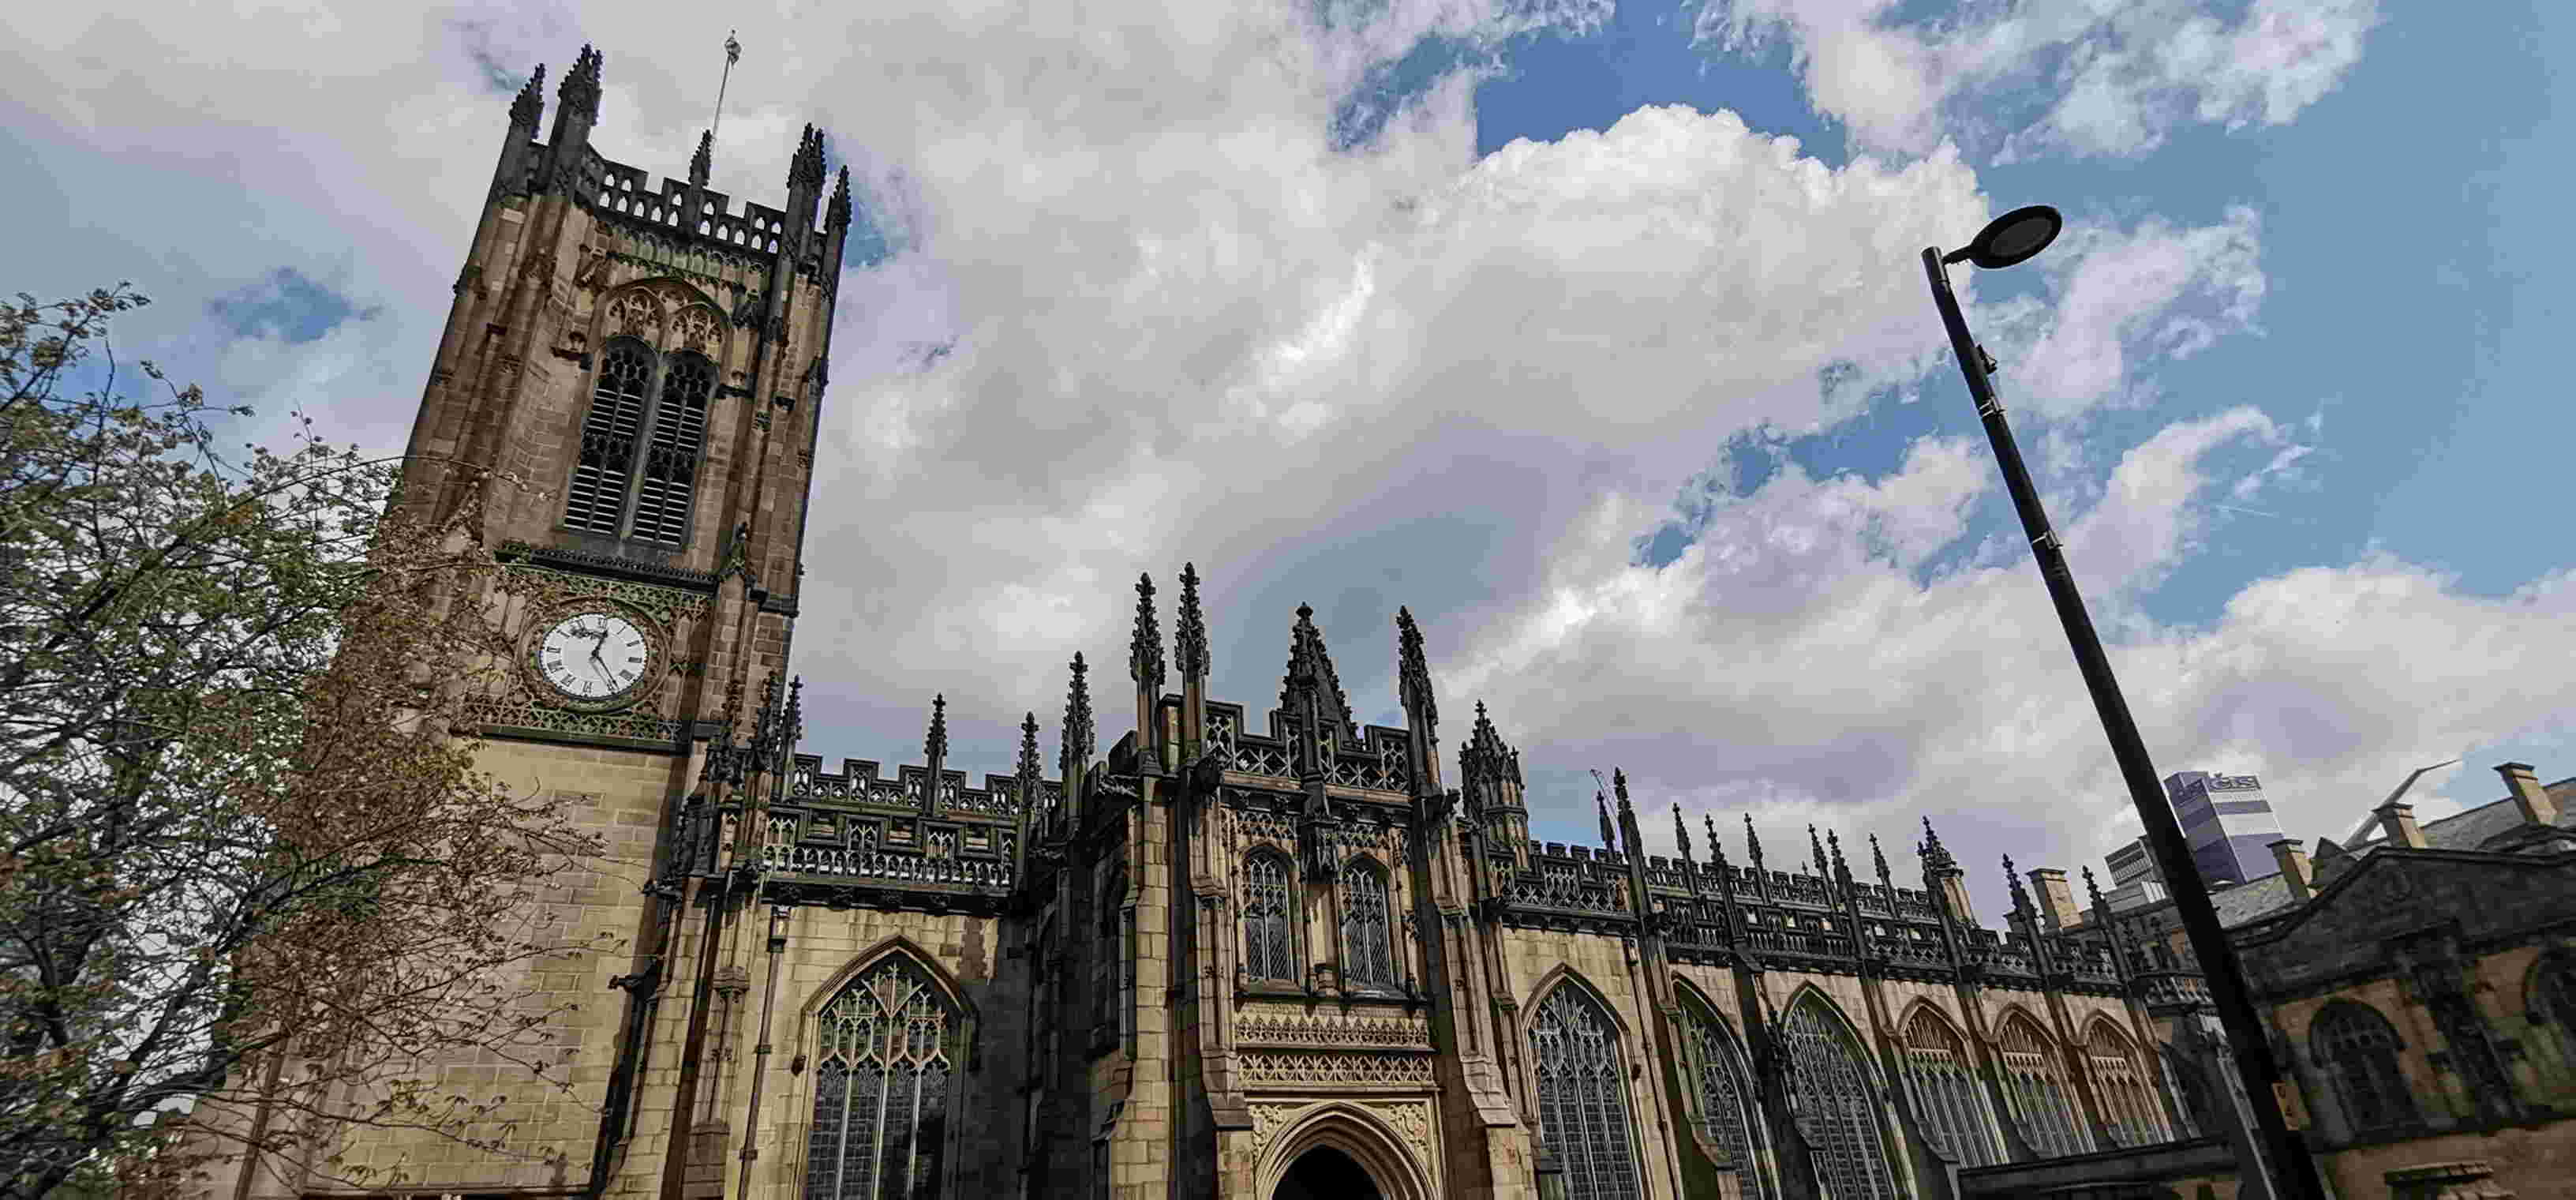   Manchester cathedral